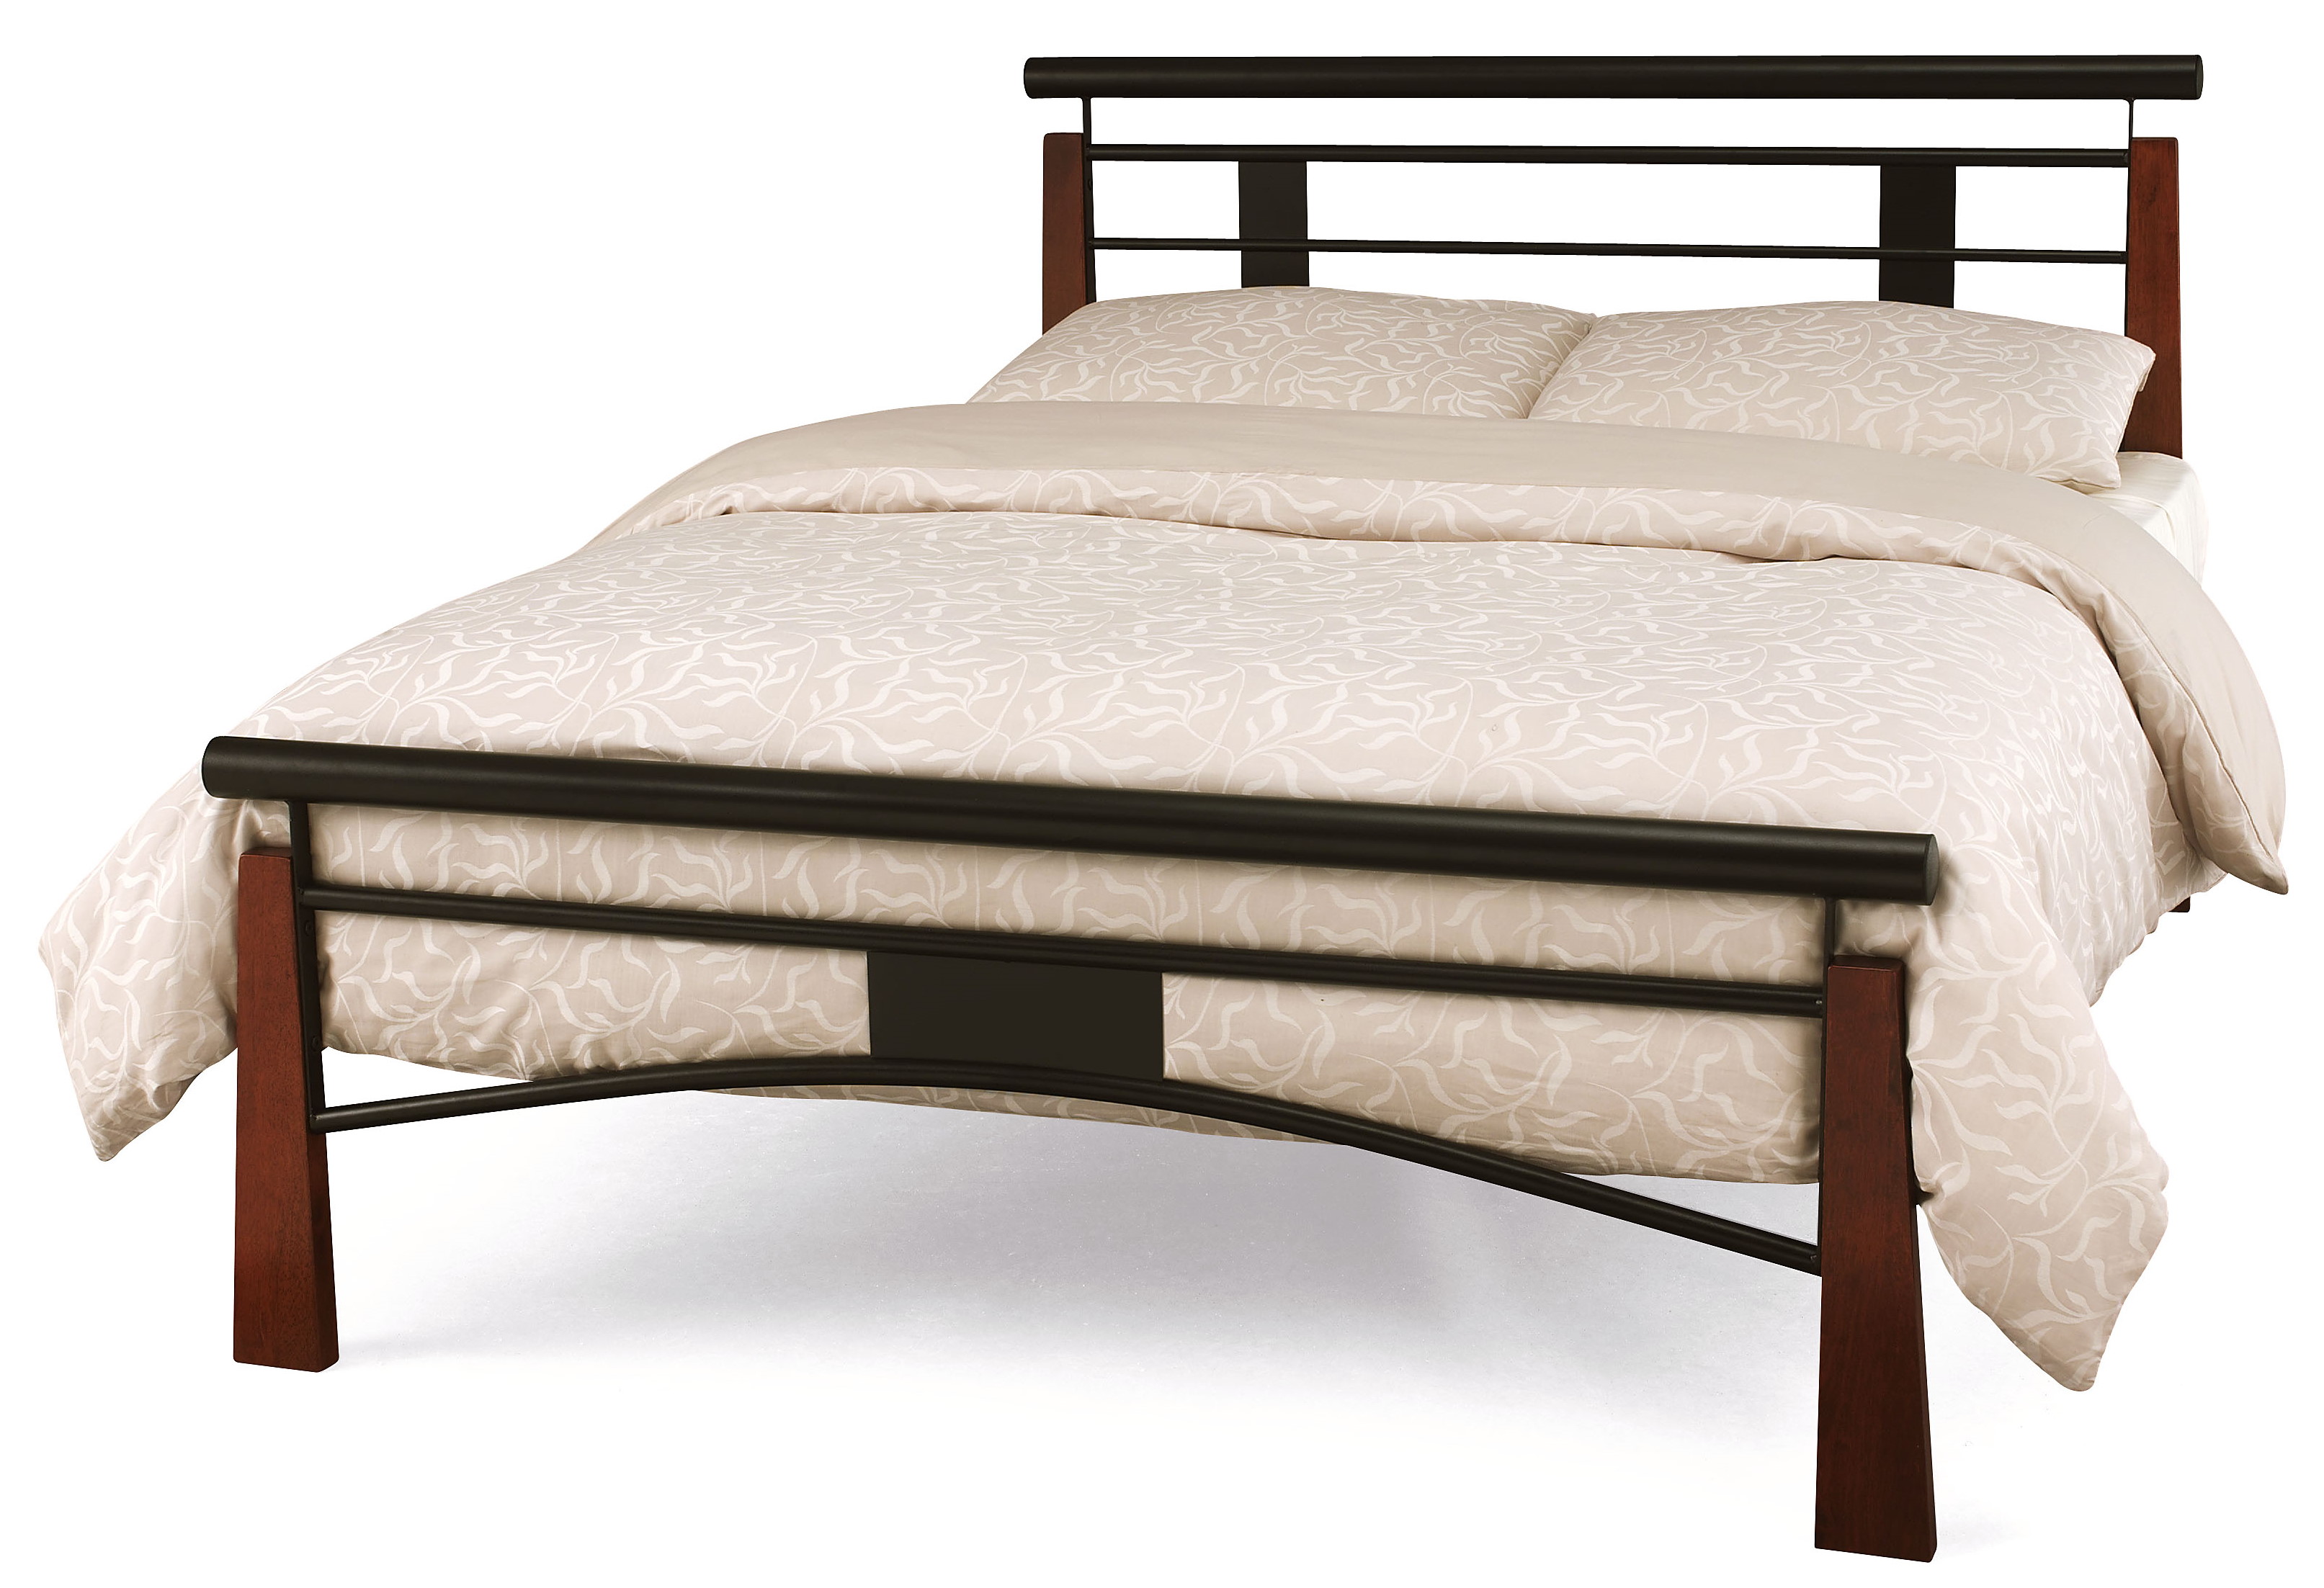 4ft6 Dark Wood And Black Metal Bed, Double Metal Bed Frame With Wooden Slats